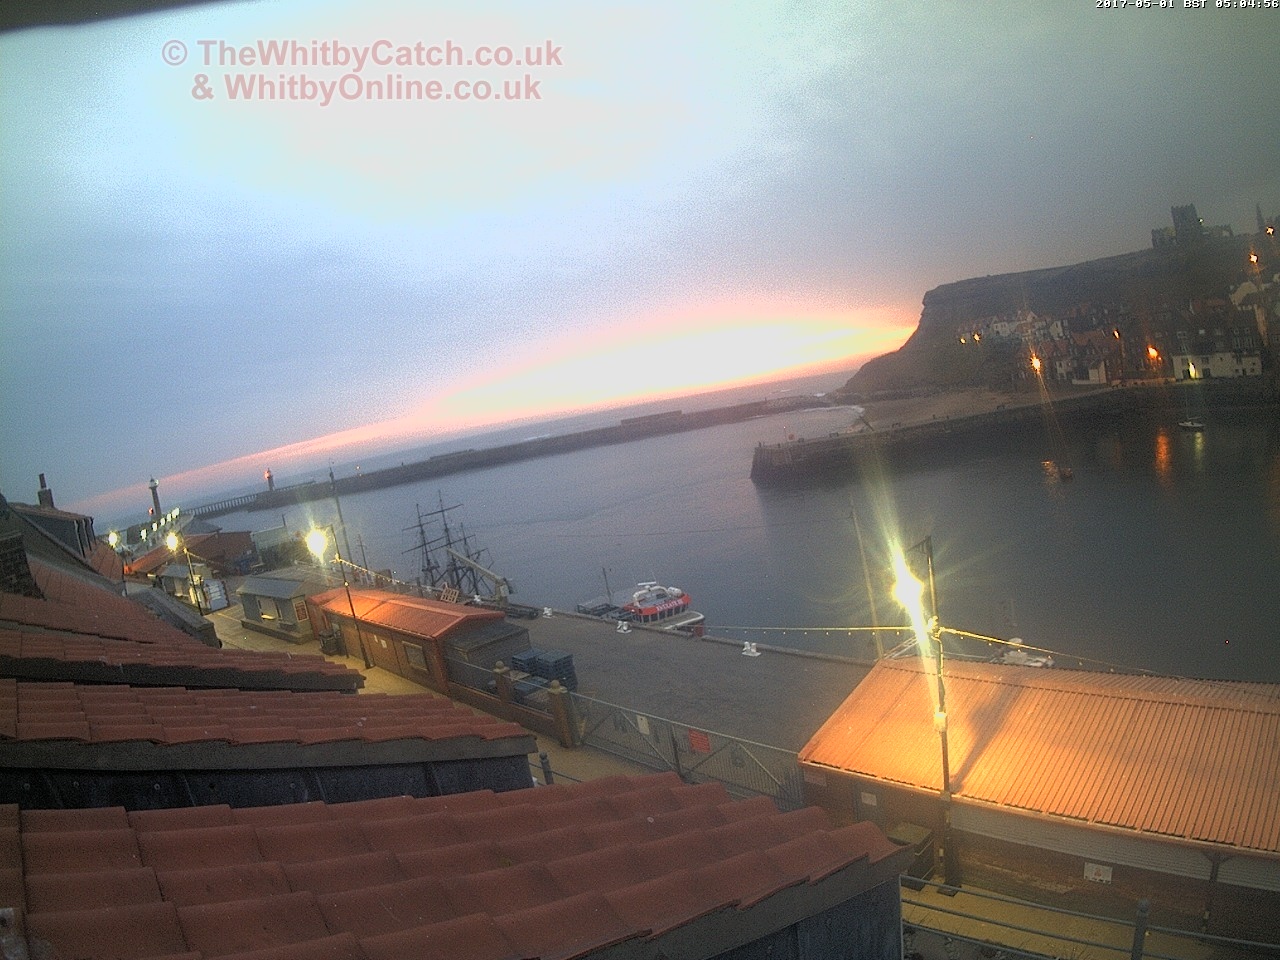 Whitby Mon 1st May 2017 05:05.